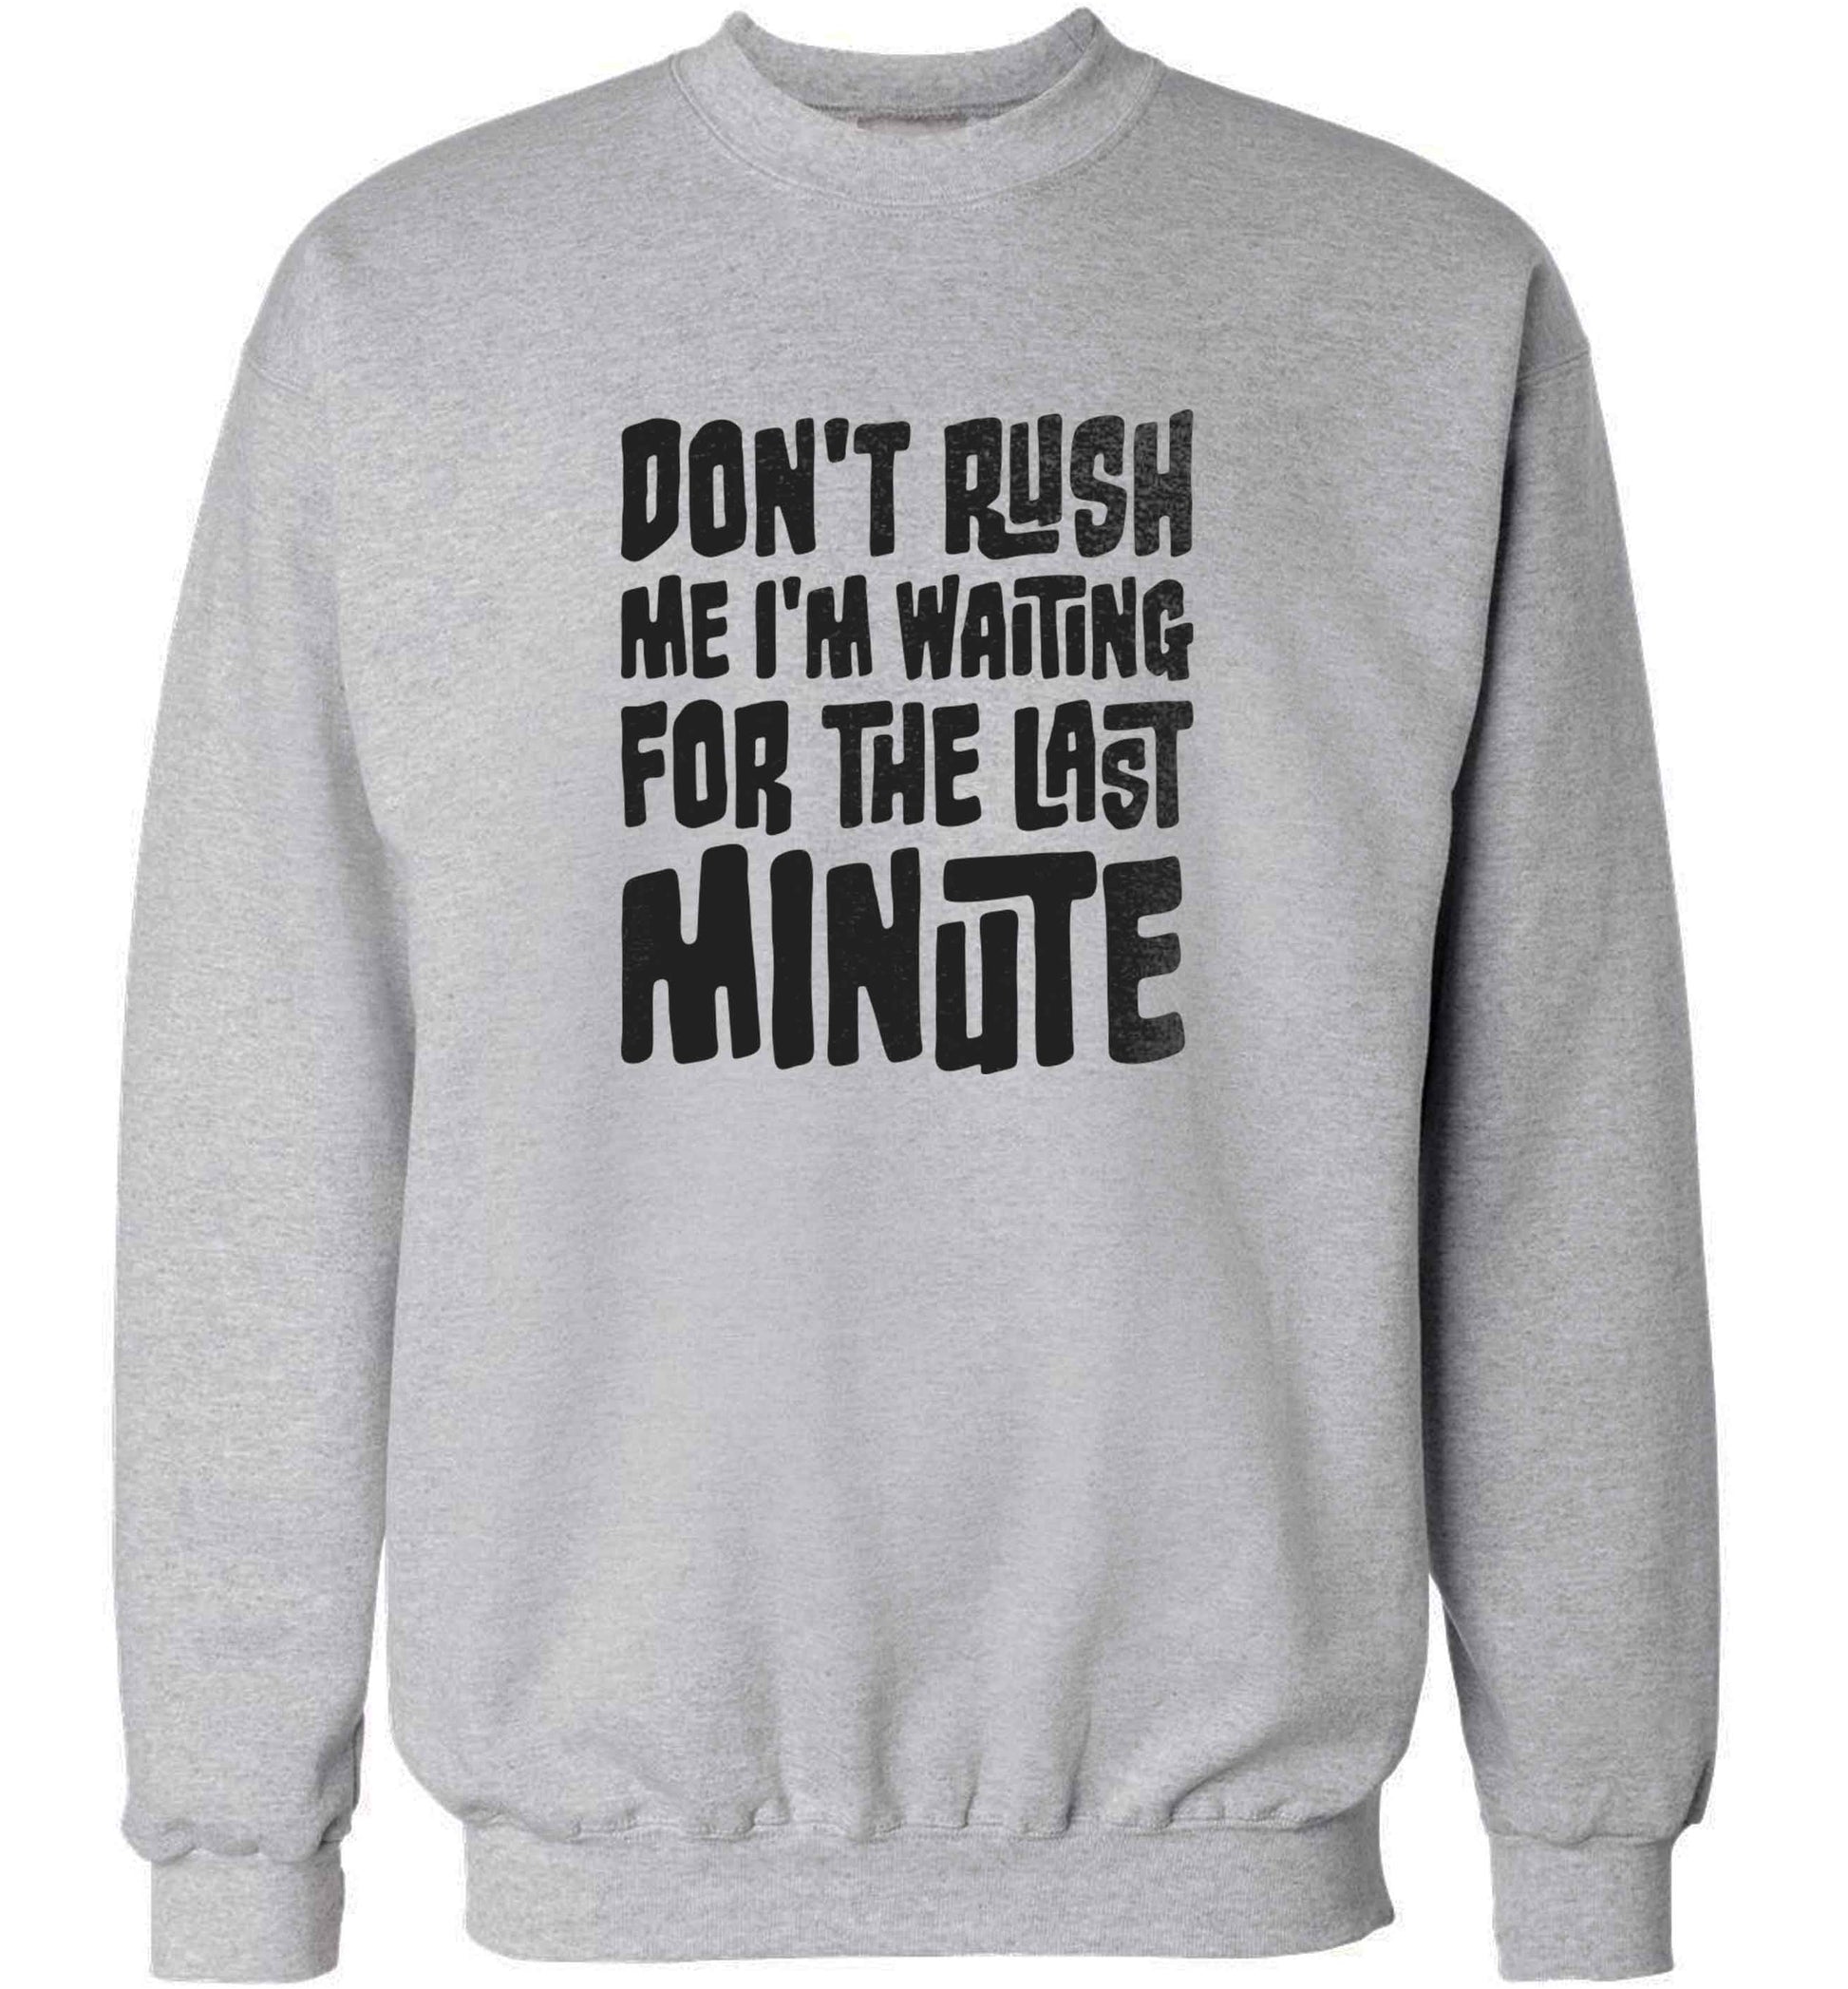 Don't rush me I'm waiting for the last minute adult's unisex grey sweater 2XL